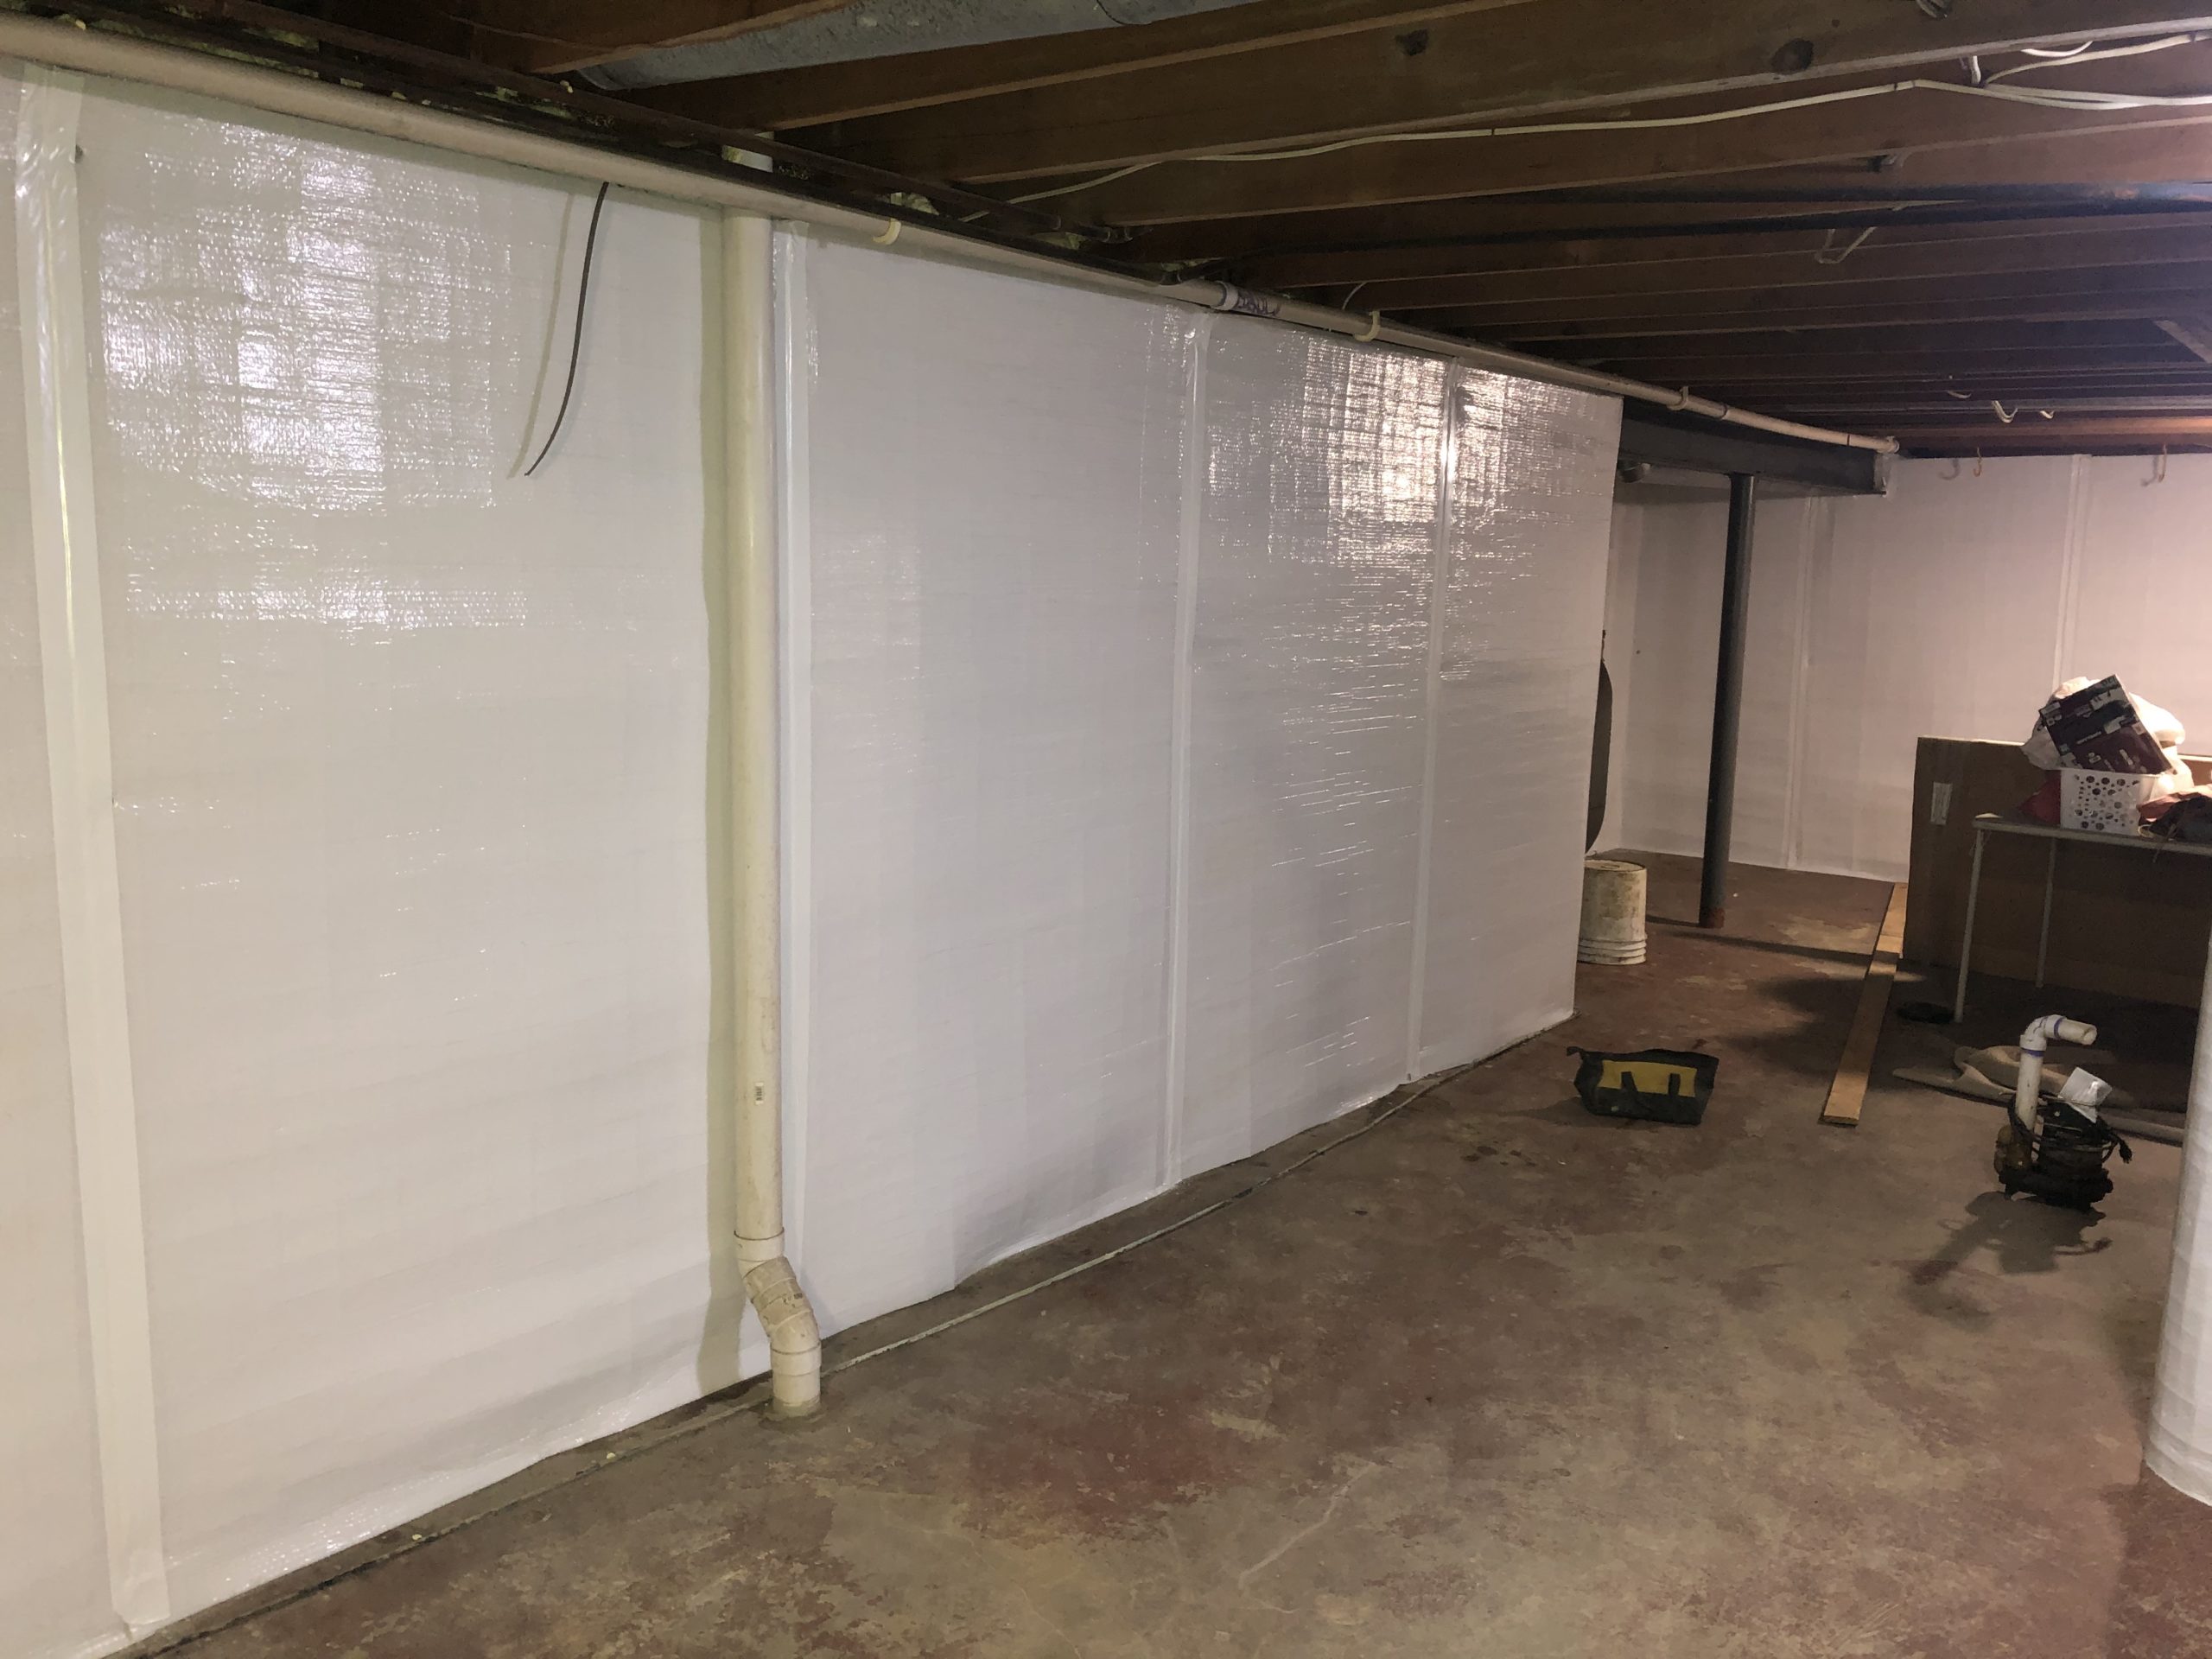 Oaks, PA Mold Remediation and Basement Waterproofing Services